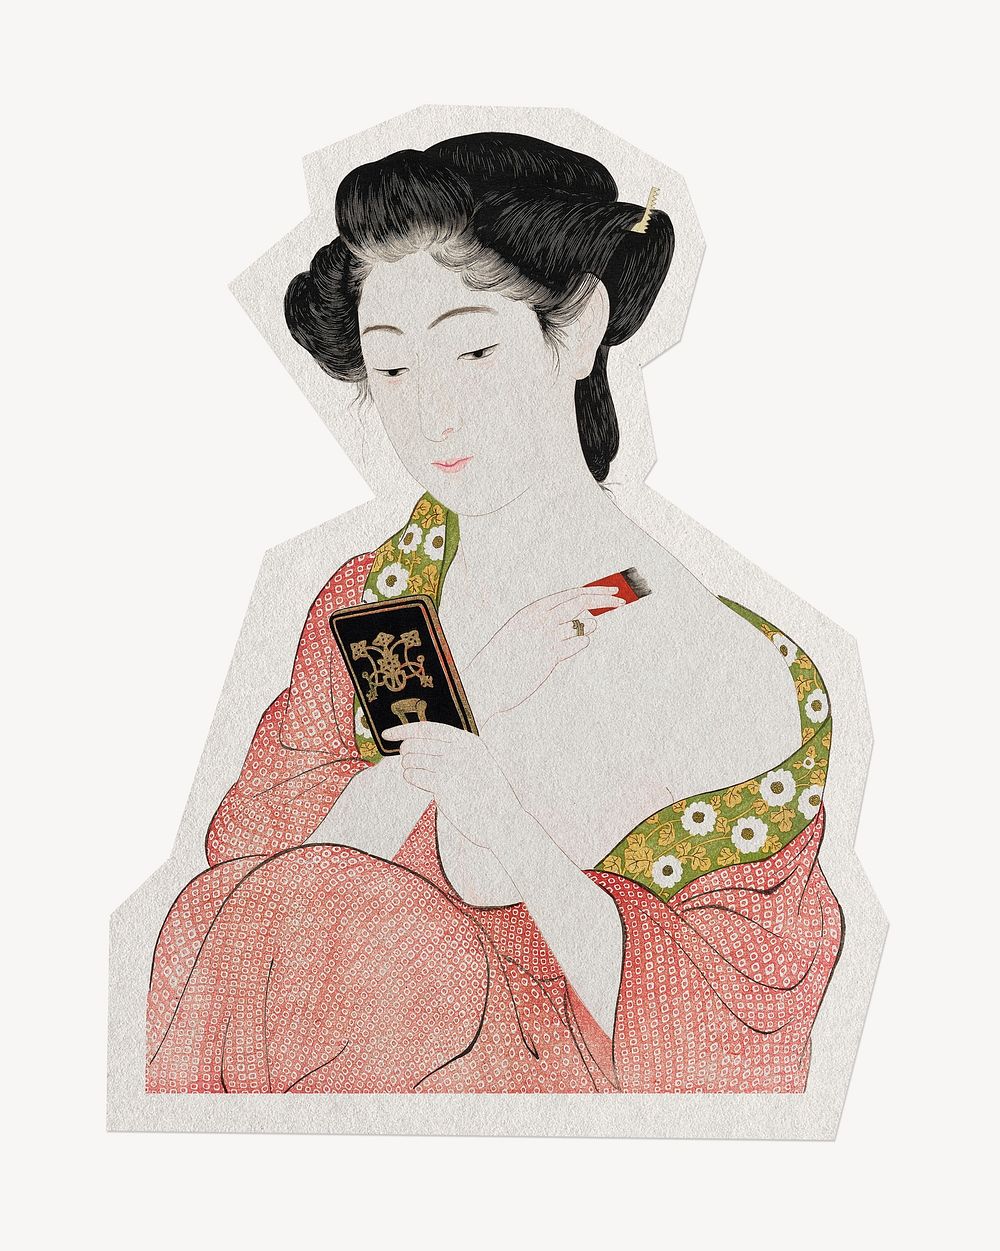 Japanese woman applying powder, paper collage element, remixed by rawpixel.